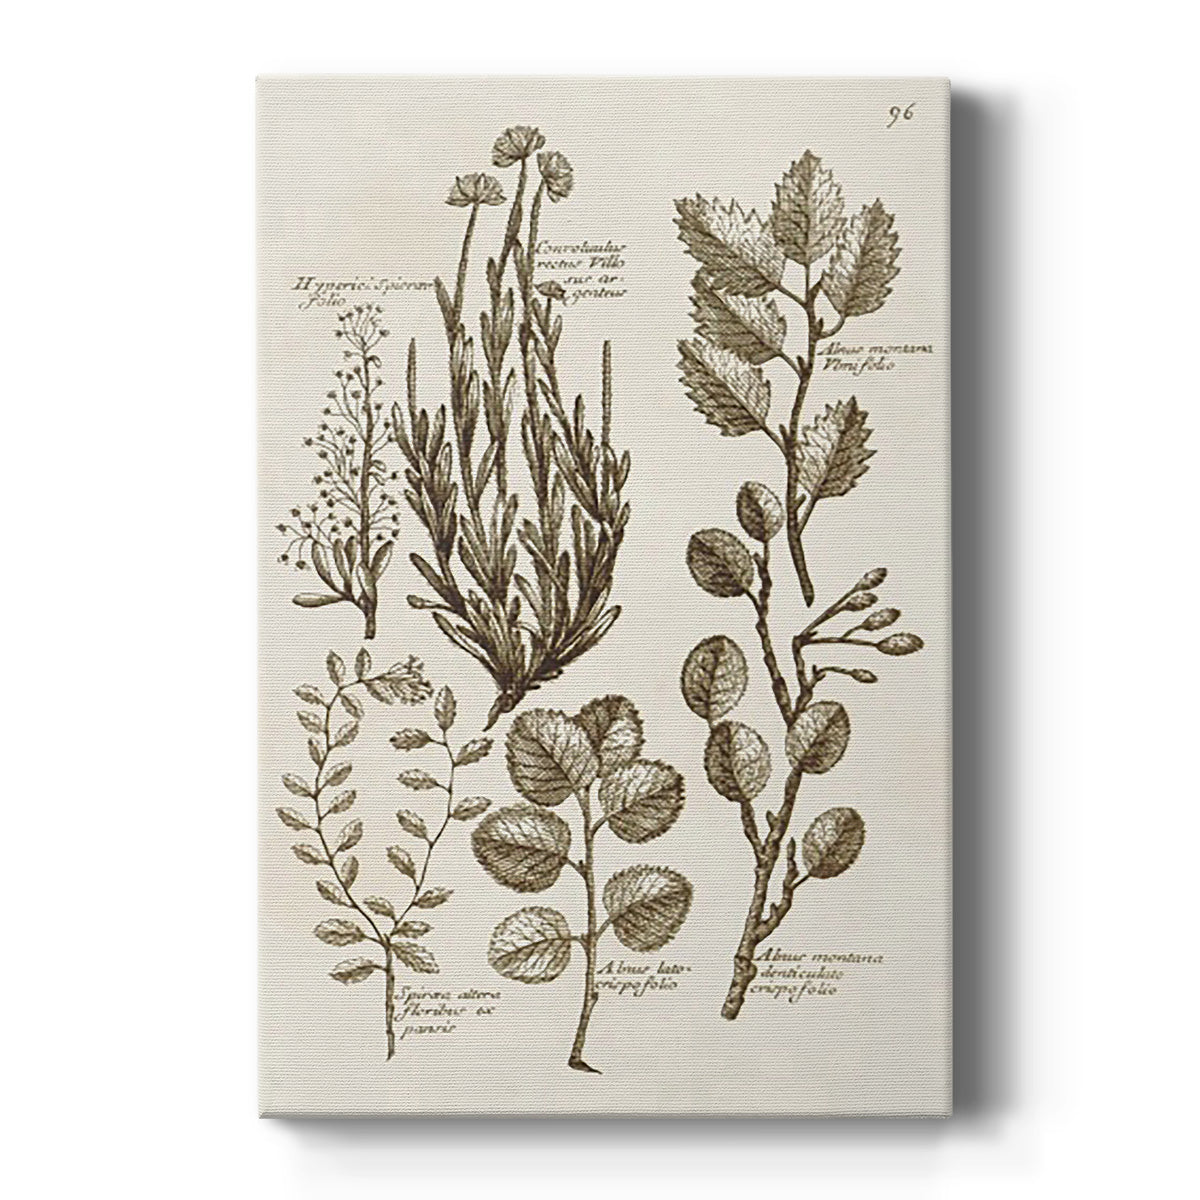 Sepia Botanical Journal VIII Premium Gallery Wrapped Canvas - Ready to Hang